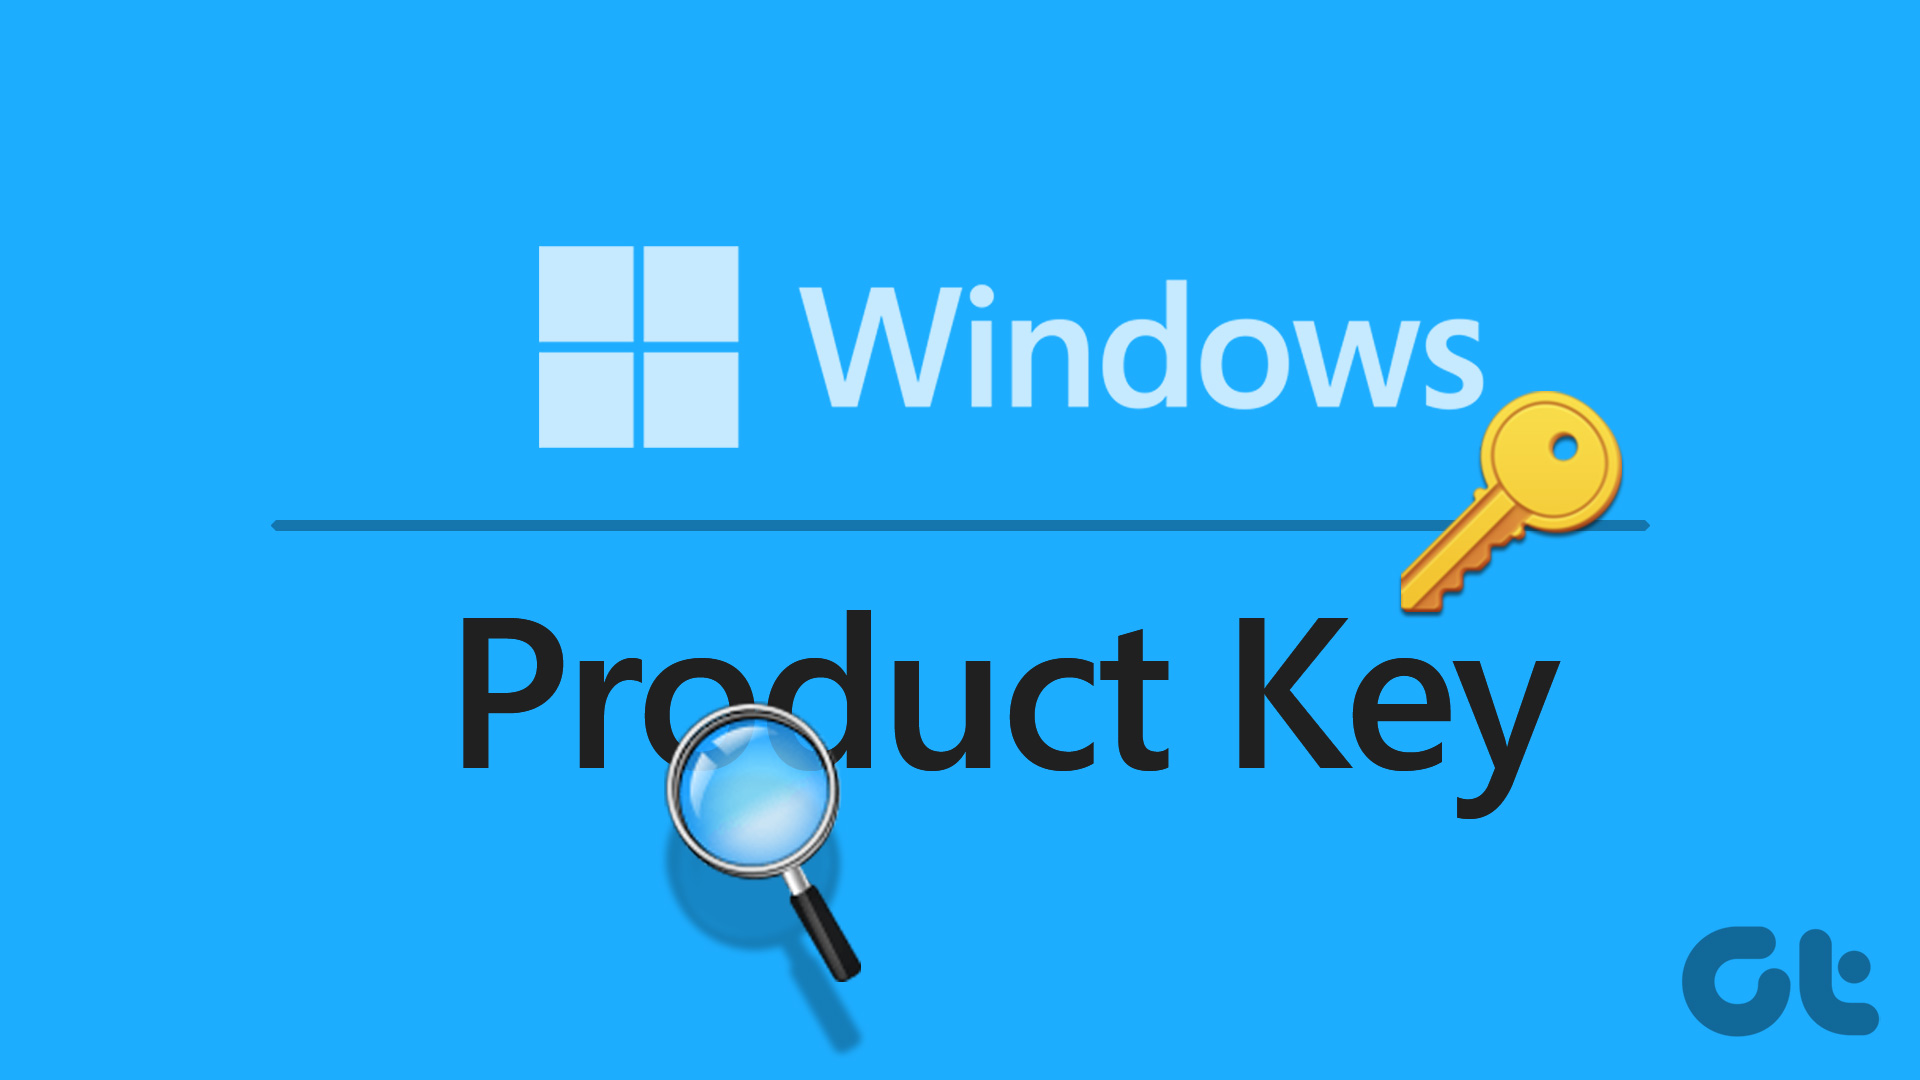 How to find Windows 10 or Windows 11 Product Key